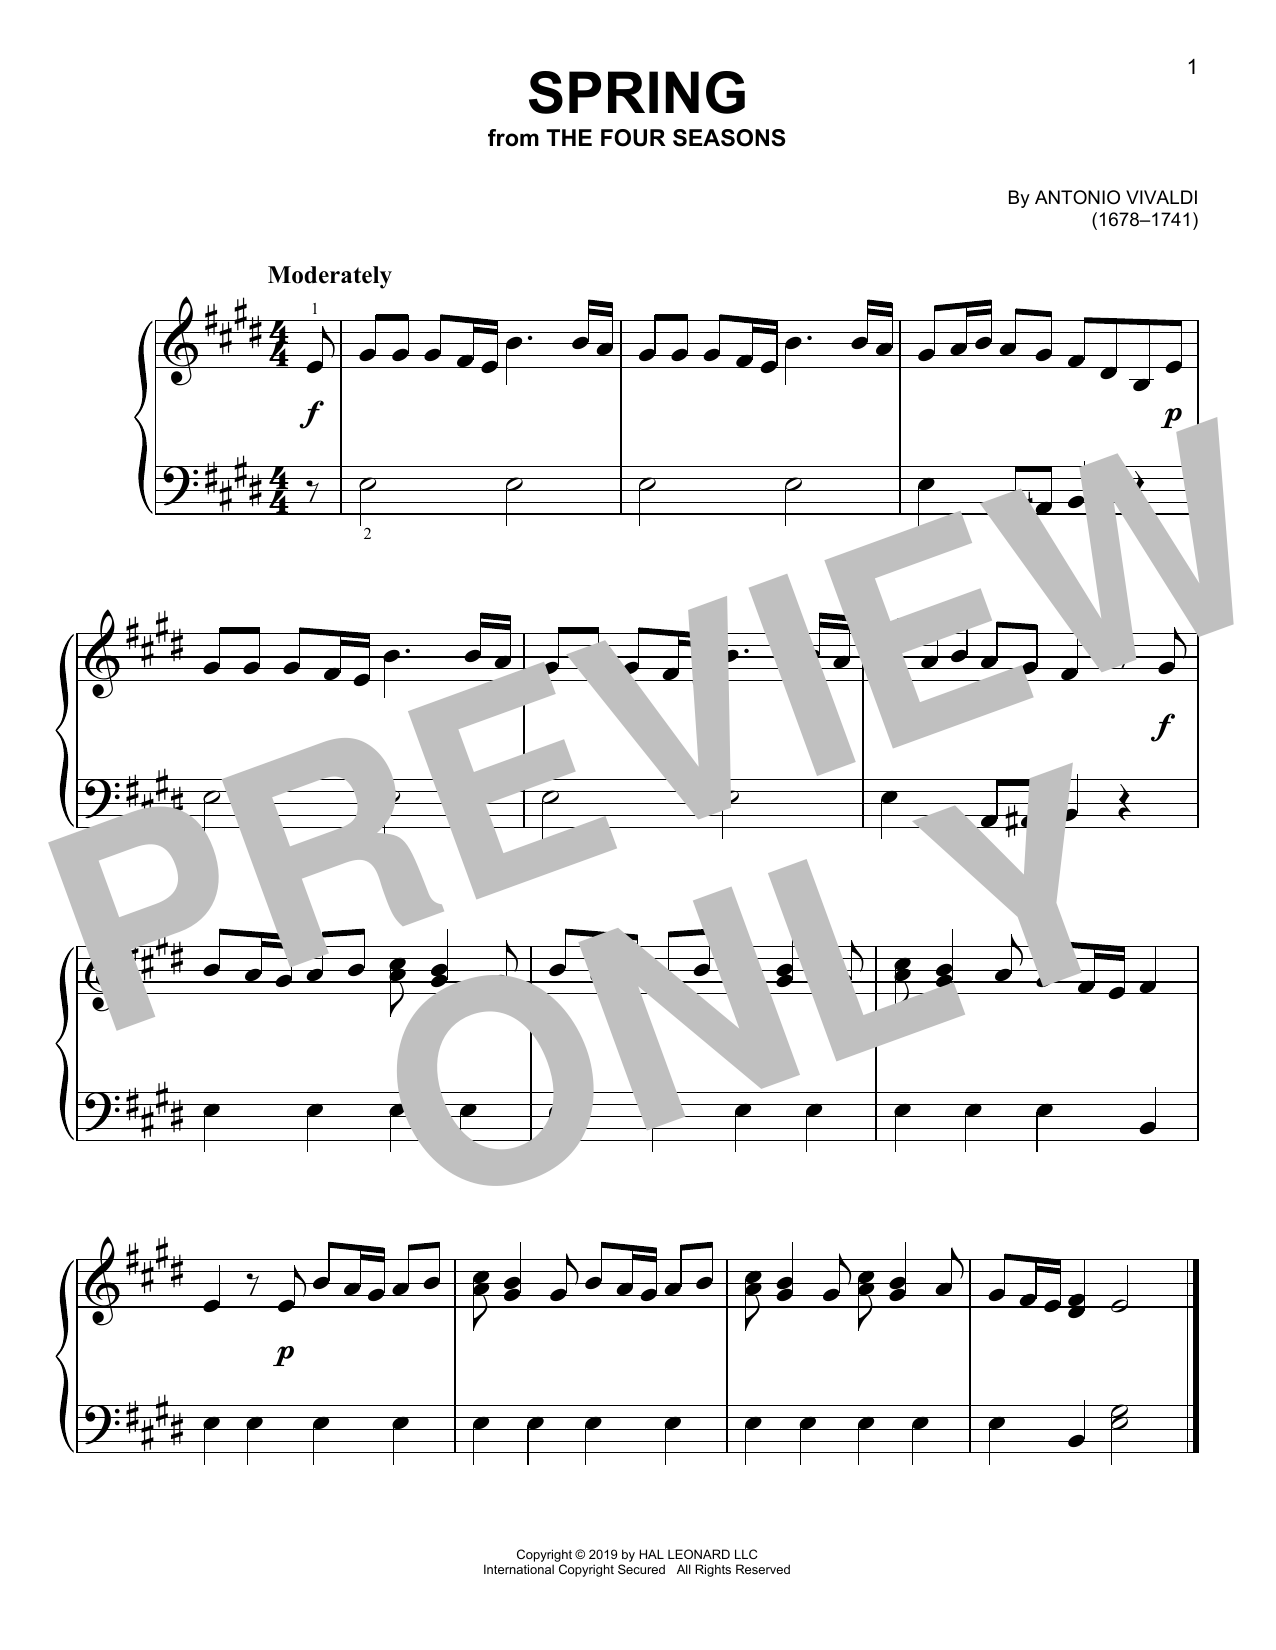 Antonio Vivaldi Spring (from The Four Seasons) sheet music notes and chords. Download Printable PDF.